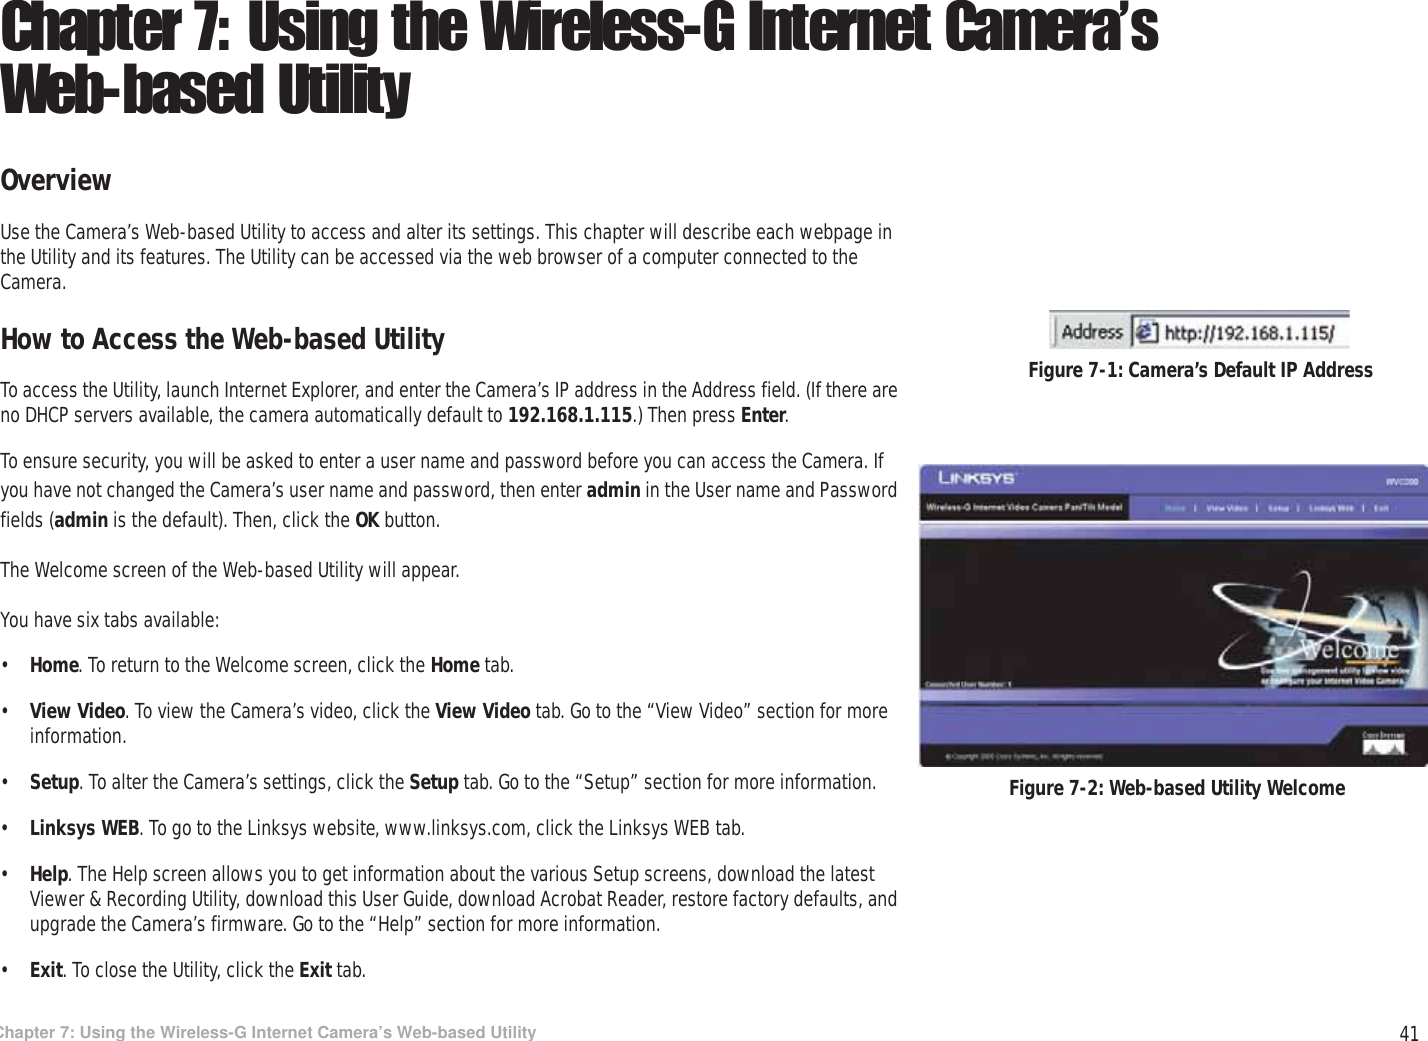 41Chapter 7: Using the Wireless-G Internet Camera’s Web-based UtilityOverviewWireless-G PTZ Internet Camera with AudioChapter 7: Using the Wireless-G Internet Camera’s Web-based UtilityOverviewUse the Camera’s Web-based Utility to access and alter its settings. This chapter will describe each webpage in the Utility and its features. The Utility can be accessed via the web browser of a computer connected to the Camera.How to Access the Web-based UtilityTo access the Utility, launch Internet Explorer, and enter the Camera’s IP address in the Address field. (If there are no DHCP servers available, the camera automatically default to 192.168.1.115.) Then press Enter.To ensure security, you will be asked to enter a user name and password before you can access the Camera. If you have not changed the Camera’s user name and password, then enter admin in the User name and Password fields (admin is the default). Then, click the OK button.The Welcome screen of the Web-based Utility will appear.You have six tabs available:•Home. To return to the Welcome screen, click the Home tab.•View Video. To view the Camera’s video, click the View Video tab. Go to the “View Video” section for more information.•Setup. To alter the Camera’s settings, click the Setup tab. Go to the “Setup” section for more information.•Linksys WEB. To go to the Linksys website, www.linksys.com, click the Linksys WEB tab.•Help. The Help screen allows you to get information about the various Setup screens, download the latest Viewer &amp; Recording Utility, download this User Guide, download Acrobat Reader, restore factory defaults, and upgrade the Camera’s firmware. Go to the “Help” section for more information.•Exit. To close the Utility, click the Exit tab.Figure 7-2: Web-based Utility WelcomeFigure 7-1: Camera’s Default IP Address